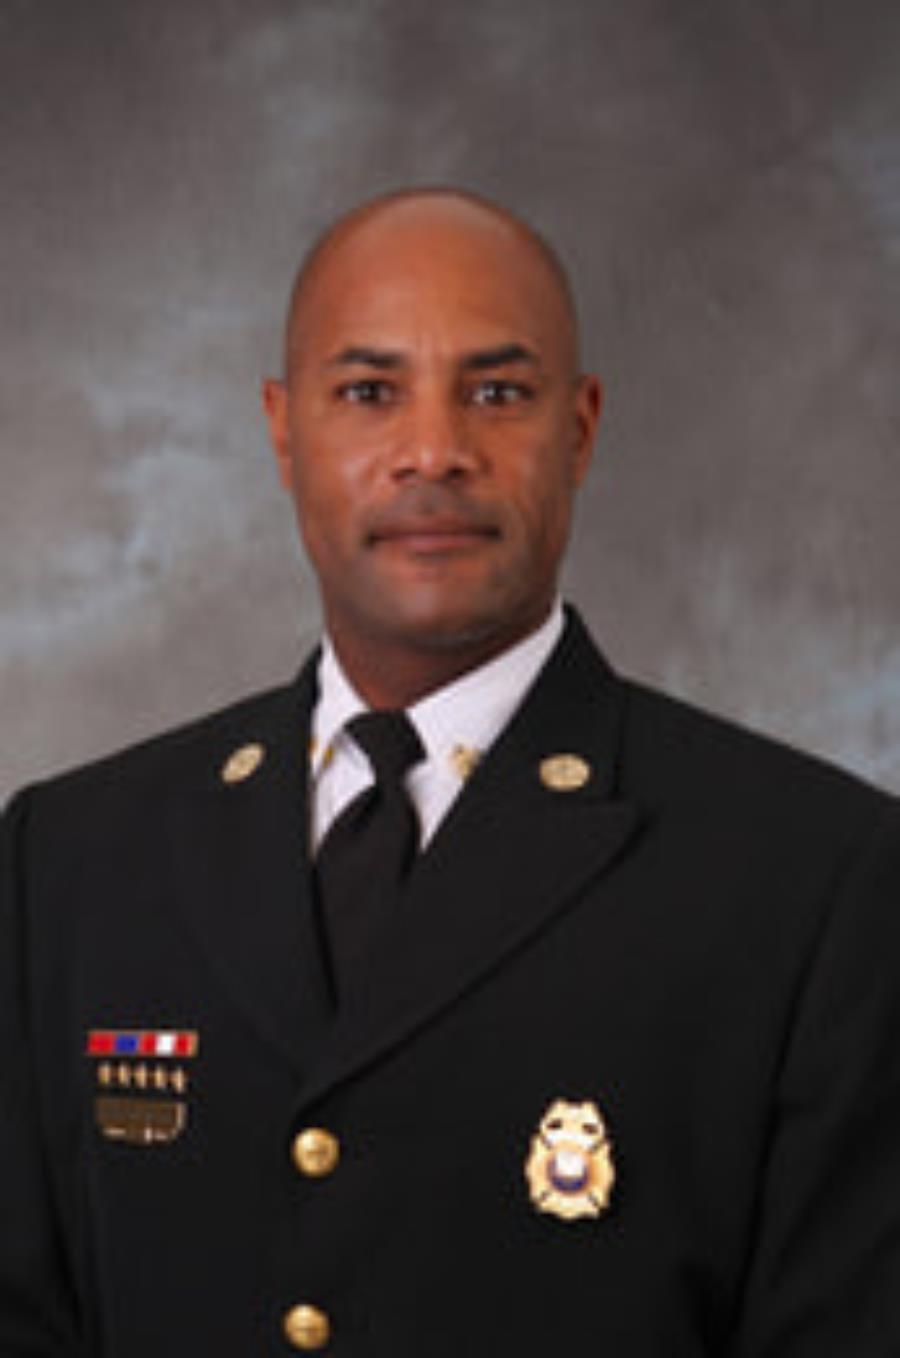 Warren McCord became Fire Chief 1-16-16 to present.